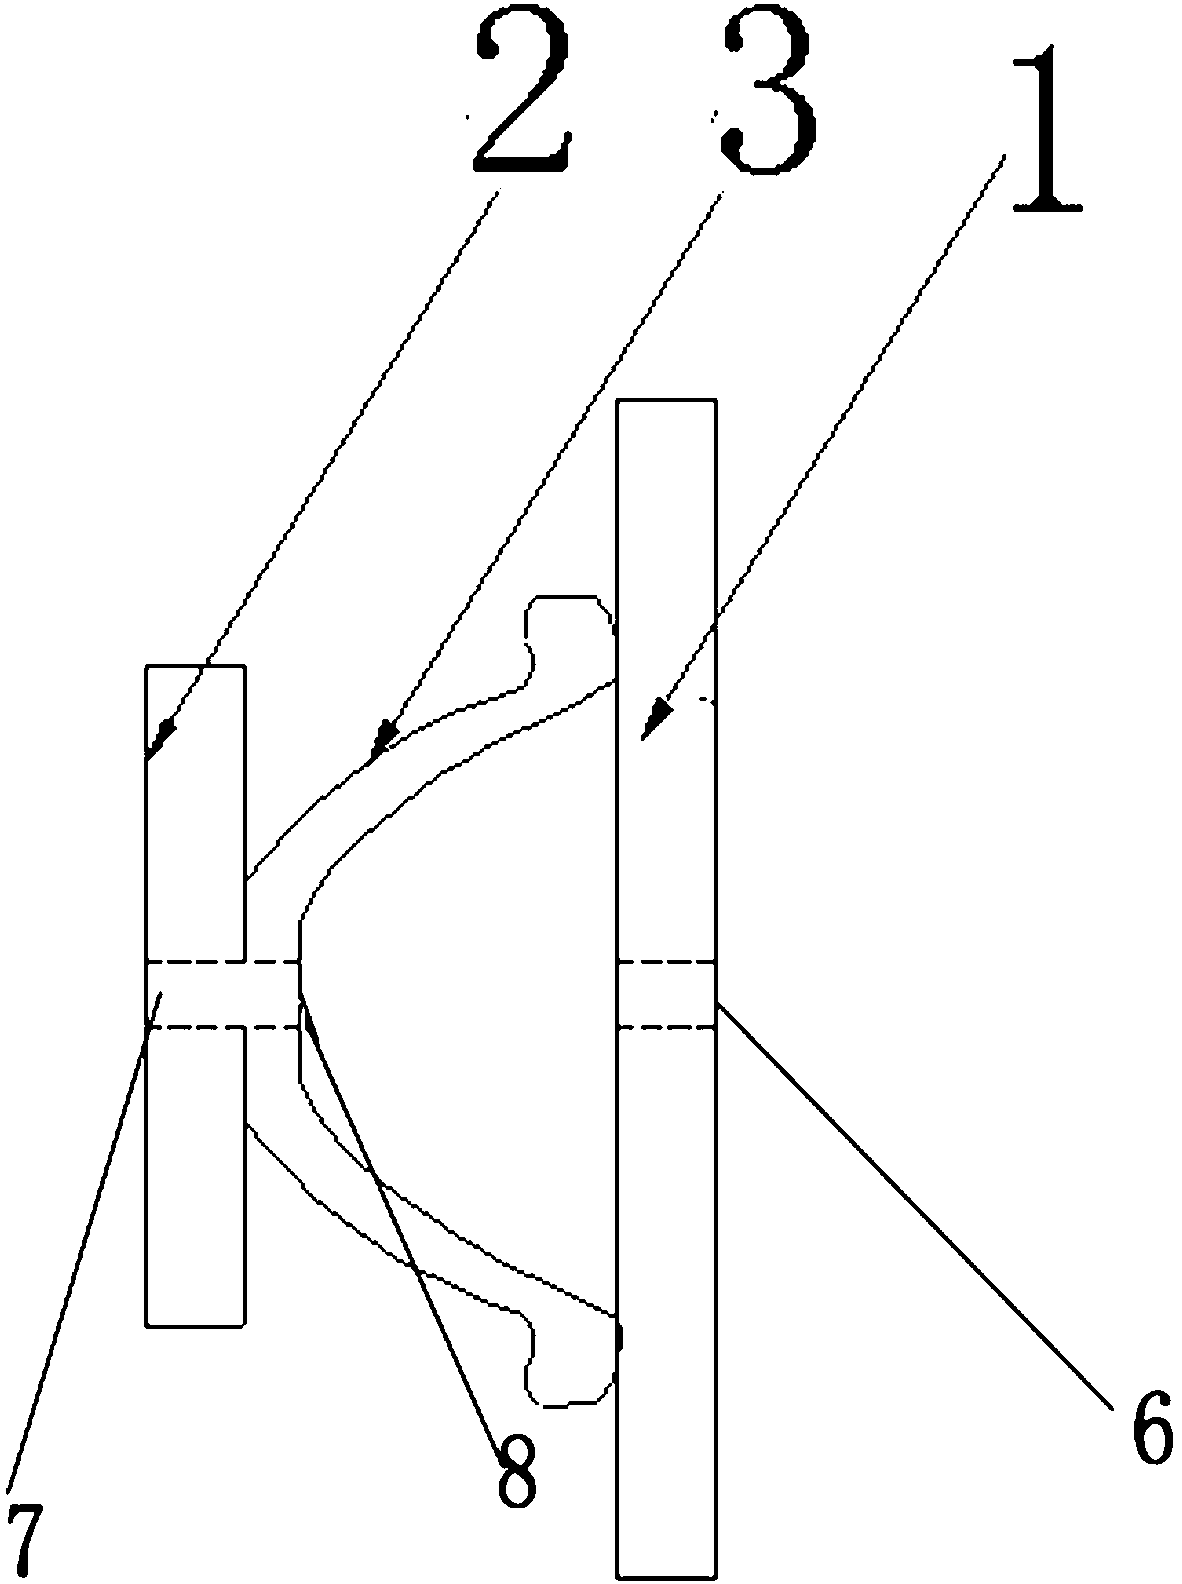 Compressible base plate device and anchor cable anchorage method by device